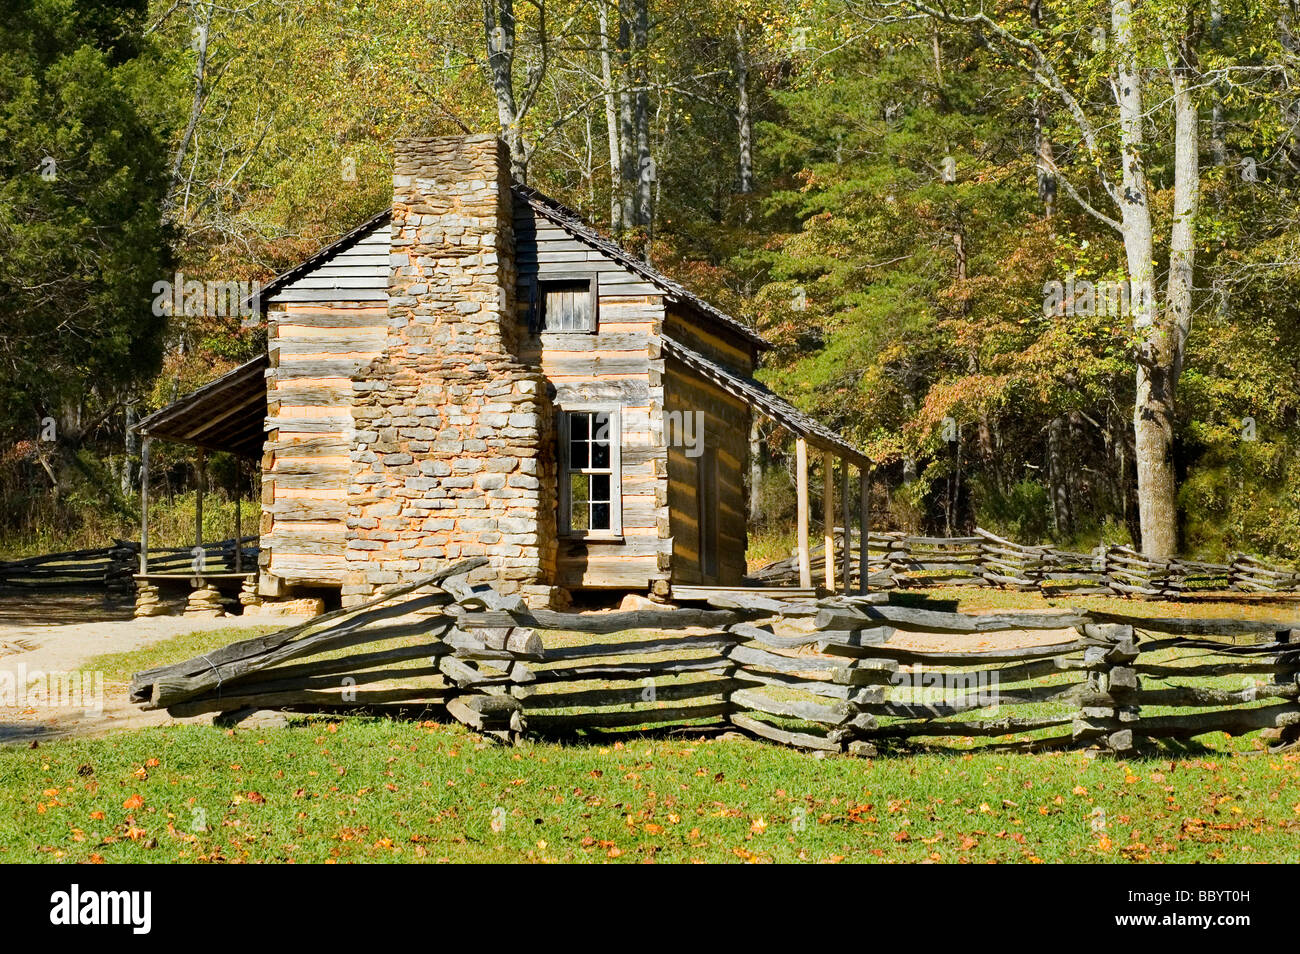 The John Oliver Cabin, Cades Cove, Great Smoky Mountains National Park, Tennessee Stock Photo